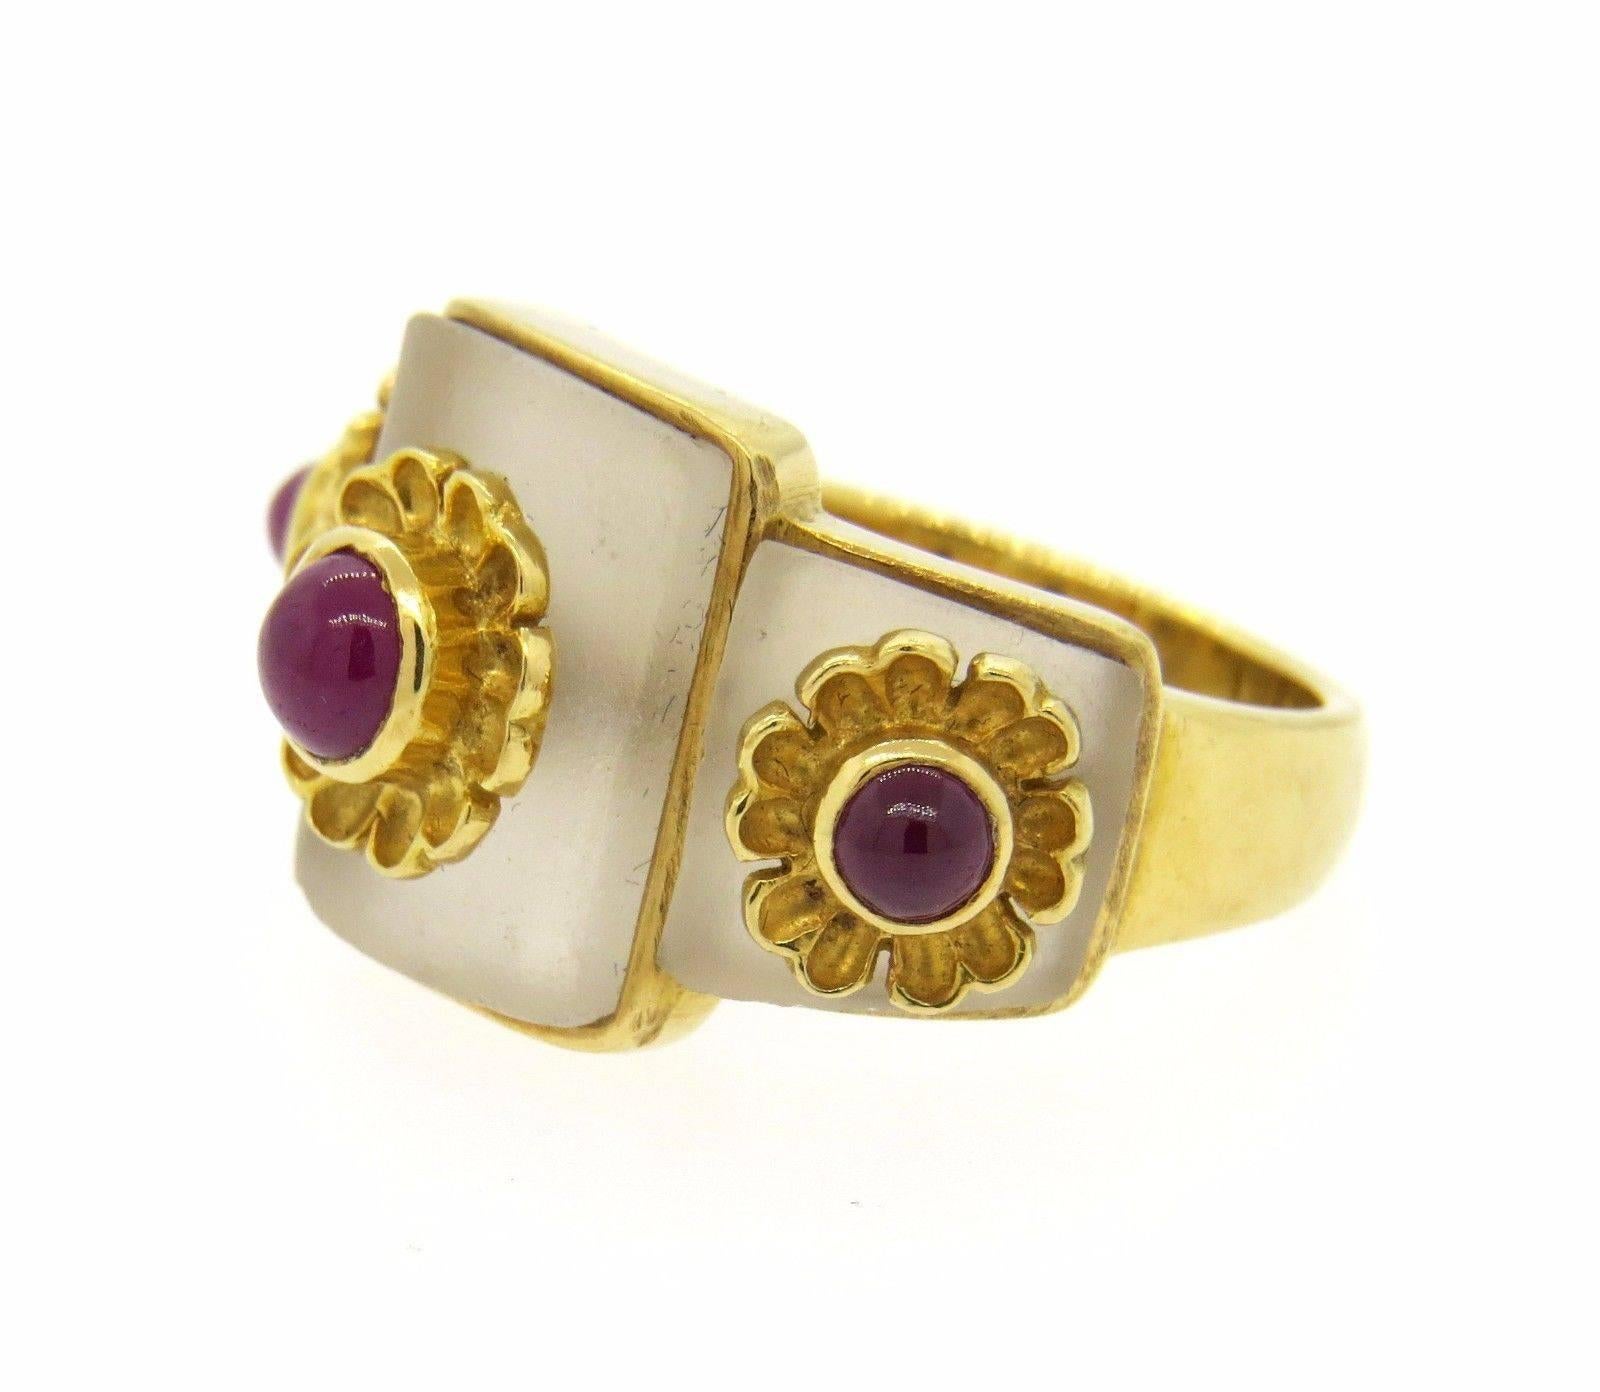 An 18k yellow gold ring set with frosted crystal and rubies.  Crafted by Ilias Lalaounis, the ring is a size 6.5, top measures 14mm at widest point. The weight of the ring is 9.9 grams.  Marked: Maker's Mark, 750, Greece, A21